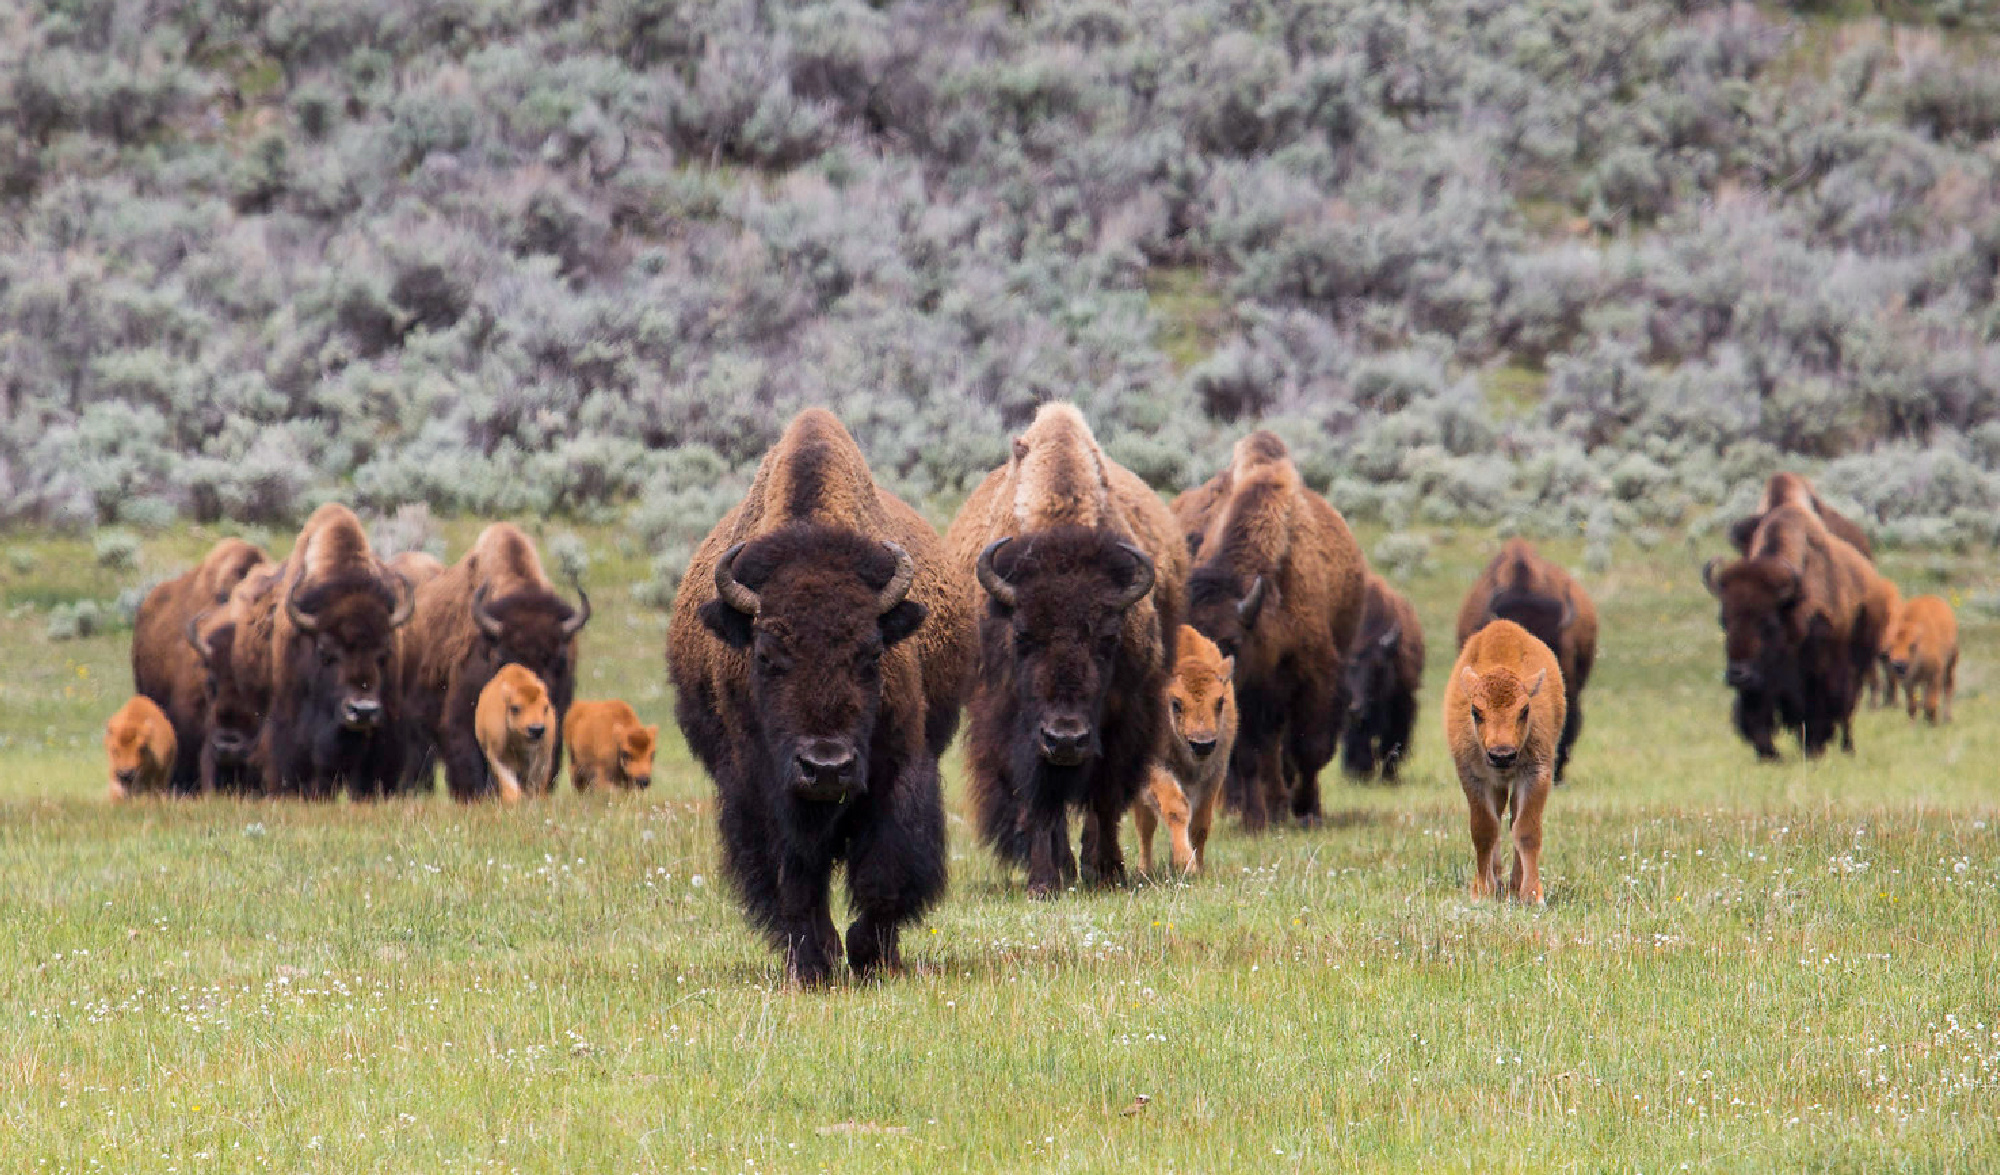 A bison herd in Yellowstone National Park.